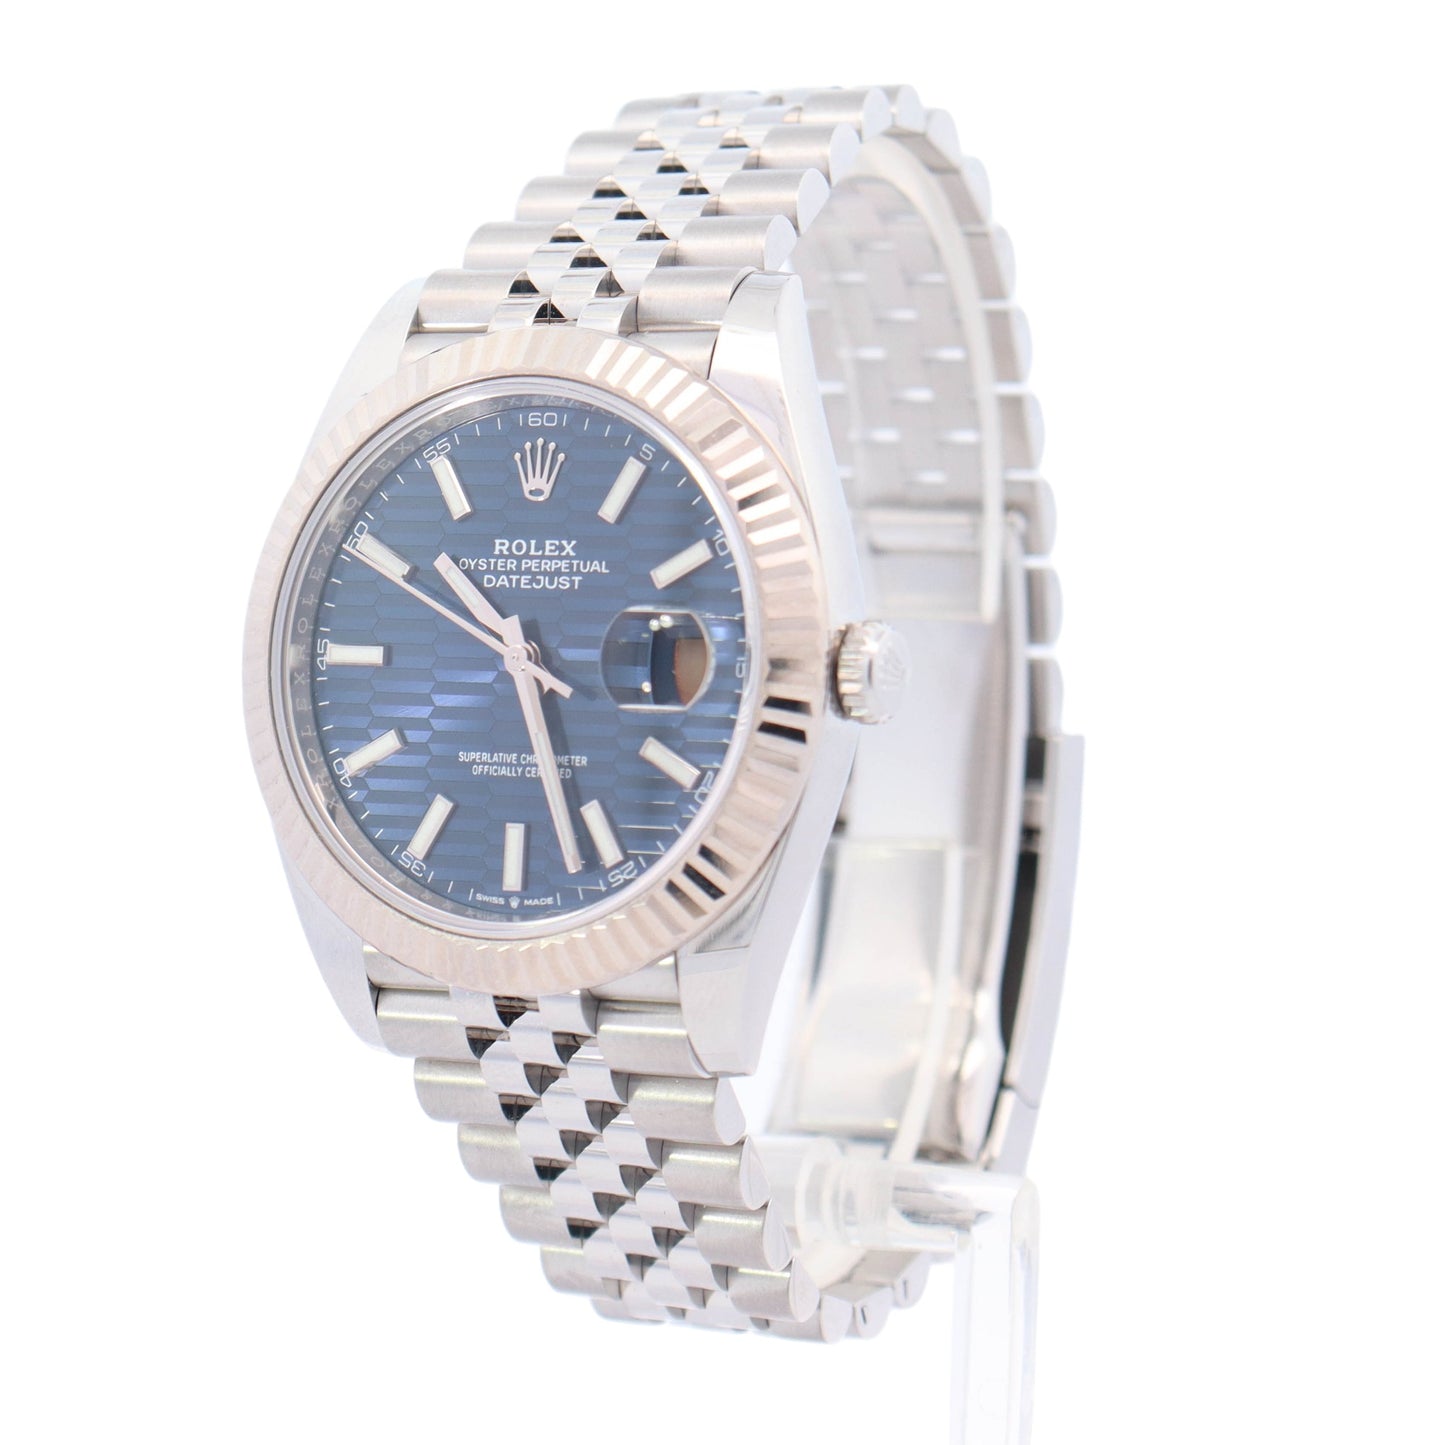 Rolex Datejust Stainless Steel 41mm Blue Motif Stick Dial Watch Reference #: 126334